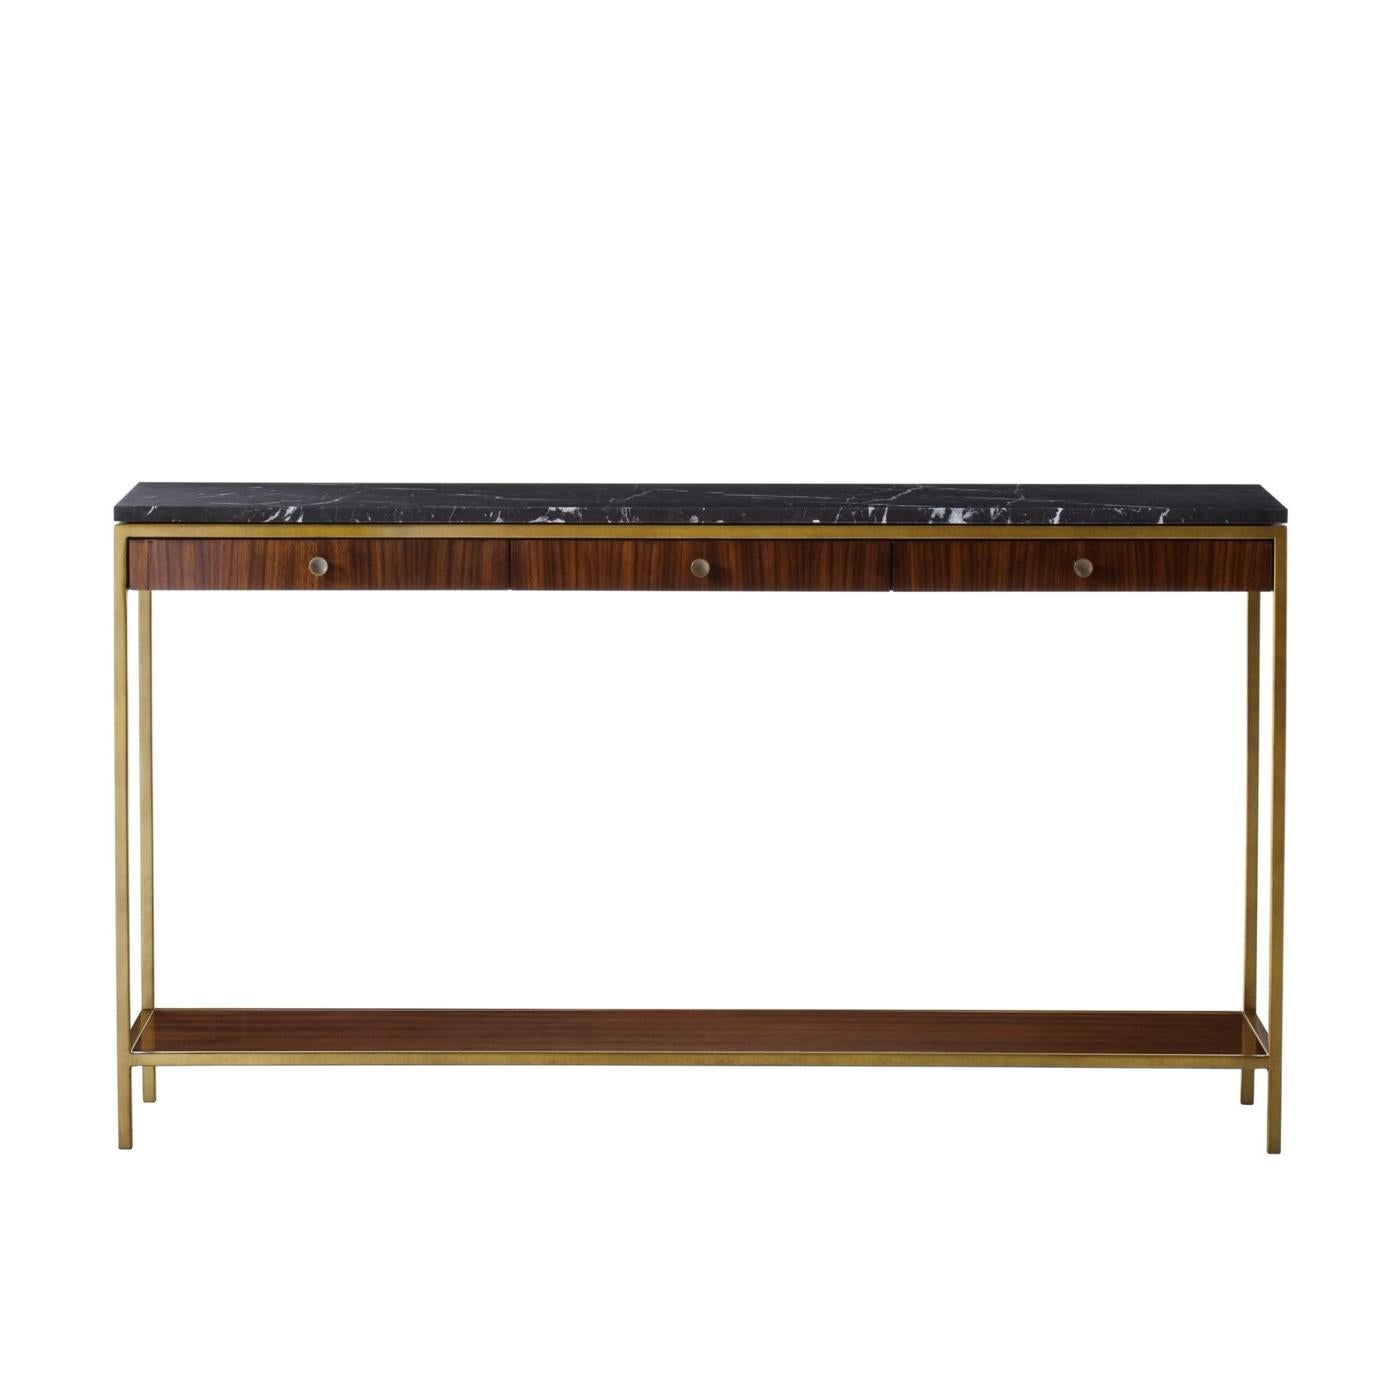 Console table Carolina with structure in steel in brass
finish with solid oak and walnut structure. With black
marquina marble top. Console table including 3 drawer.